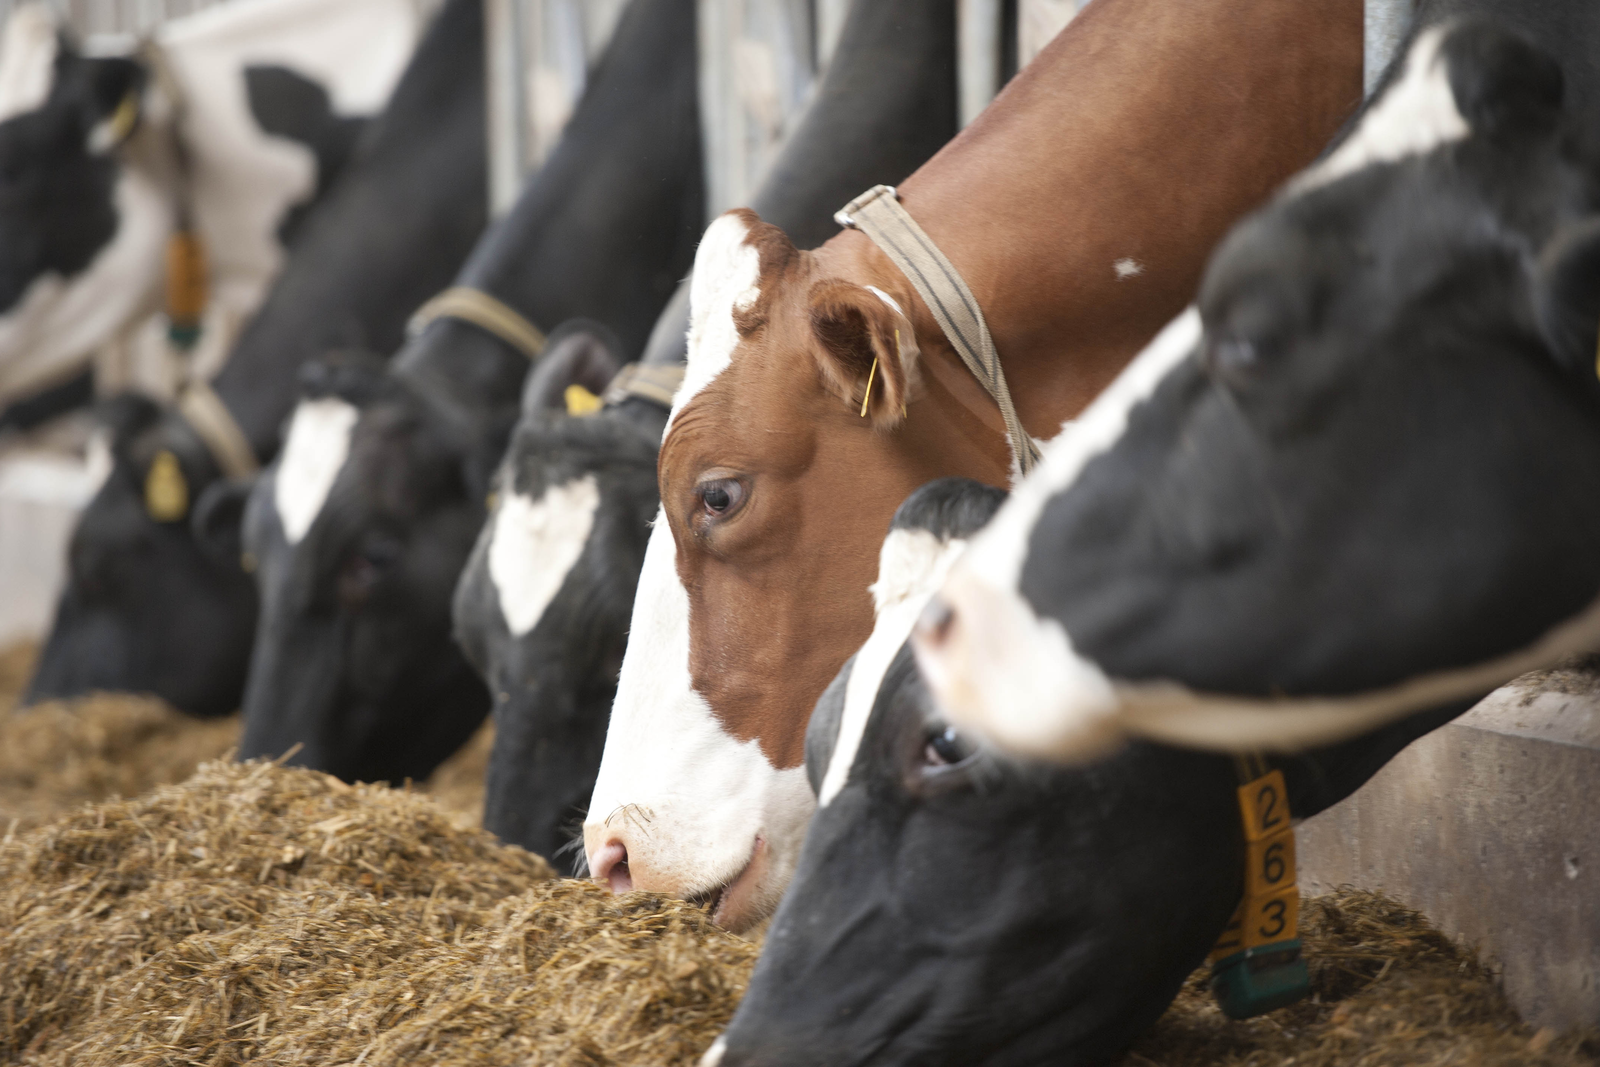 Big data can help in feed intake predictions